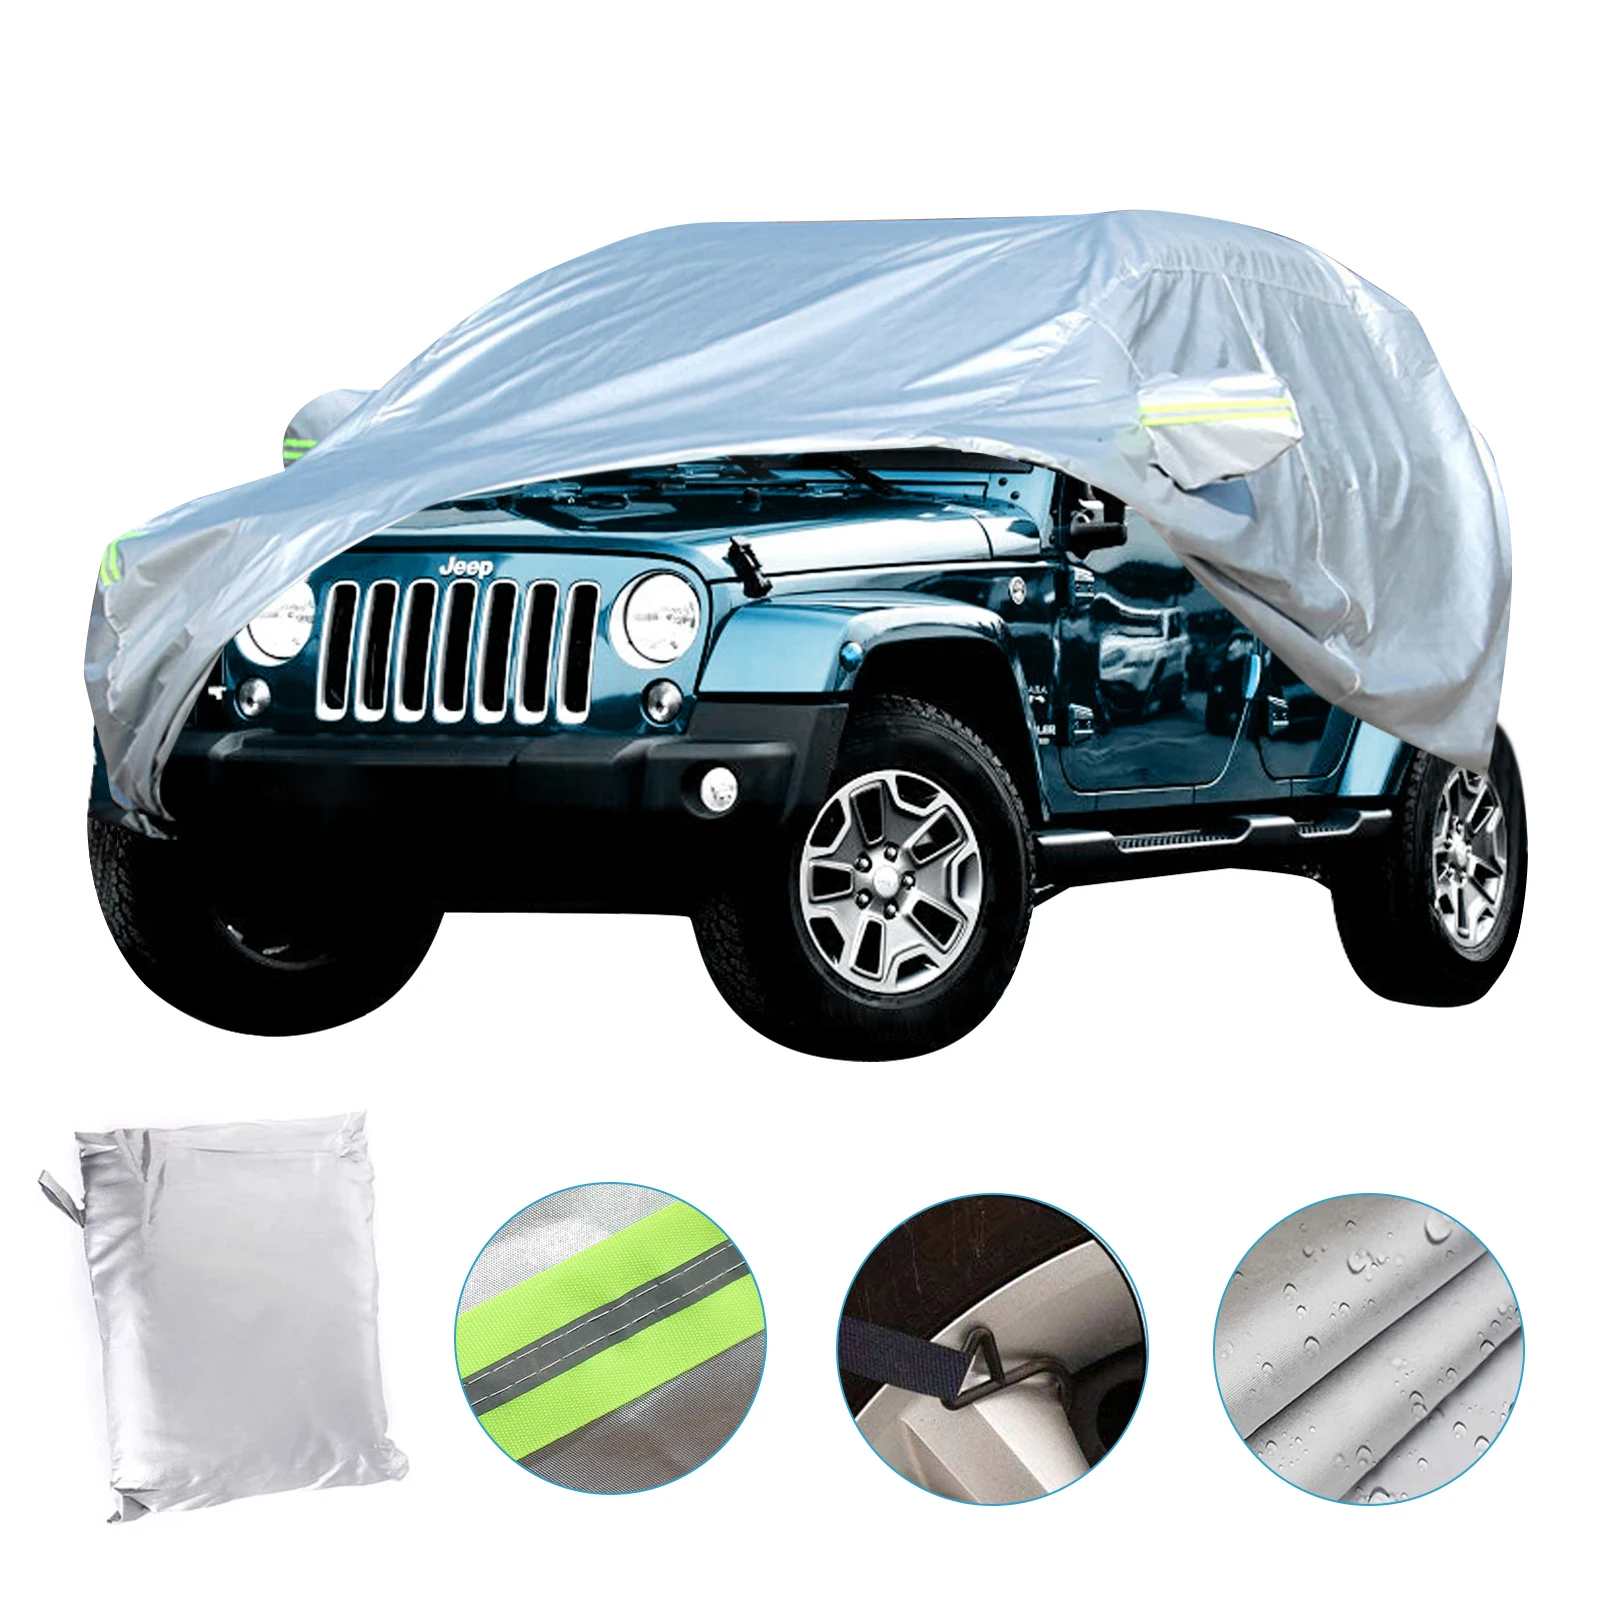 210D Oxford Car Cover Compatible With Jeep Wrangler Cover 2 Door Waterproof For YJ TJ JK & JL 1987-2020 With Windproof Straps